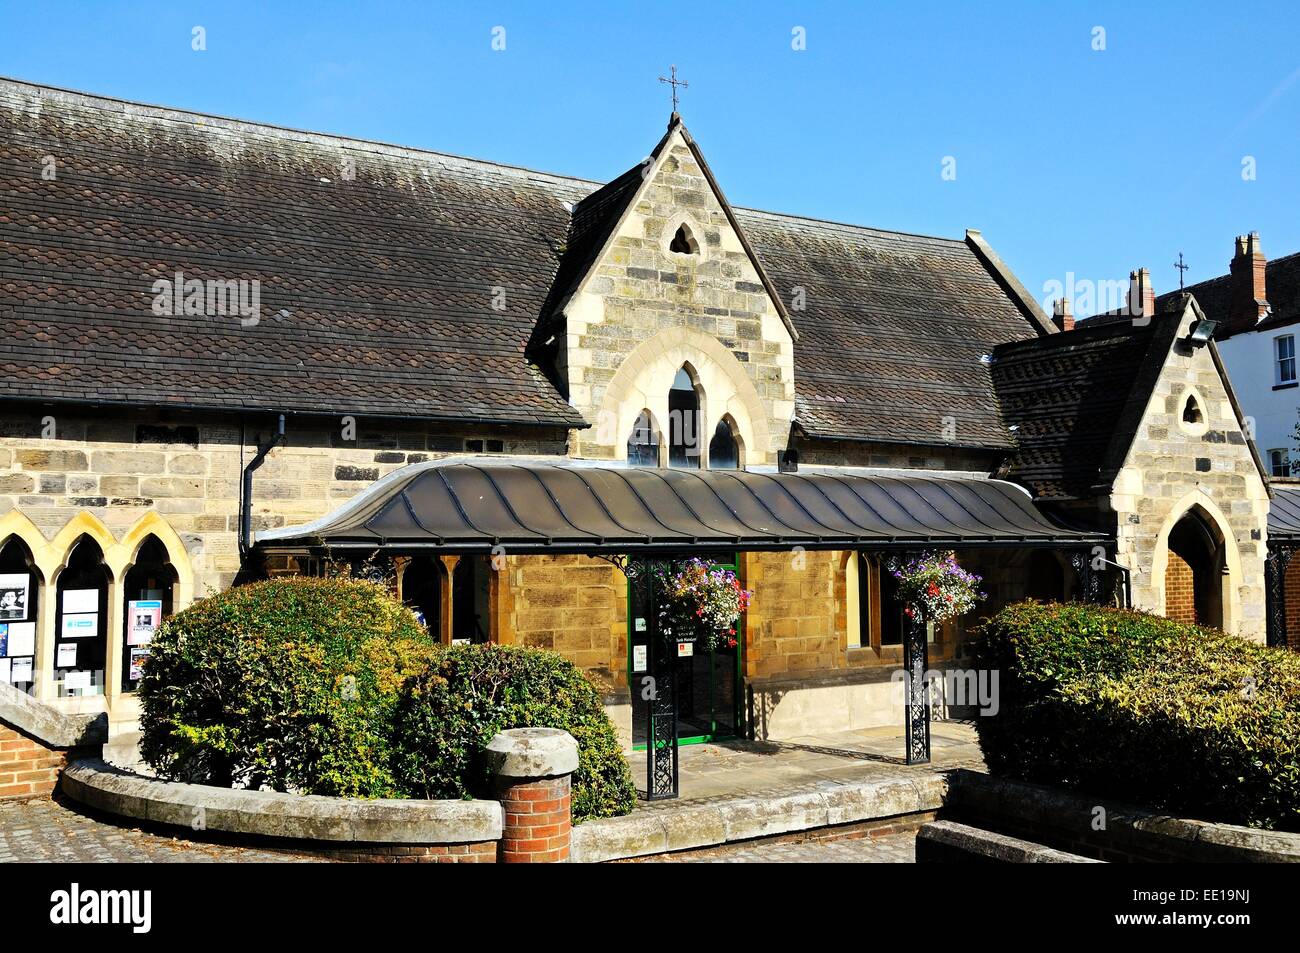 The former Victorian St Marys schoolrooms, Stafford, Staffordshire, England, UK, Western Europe. Stock Photo